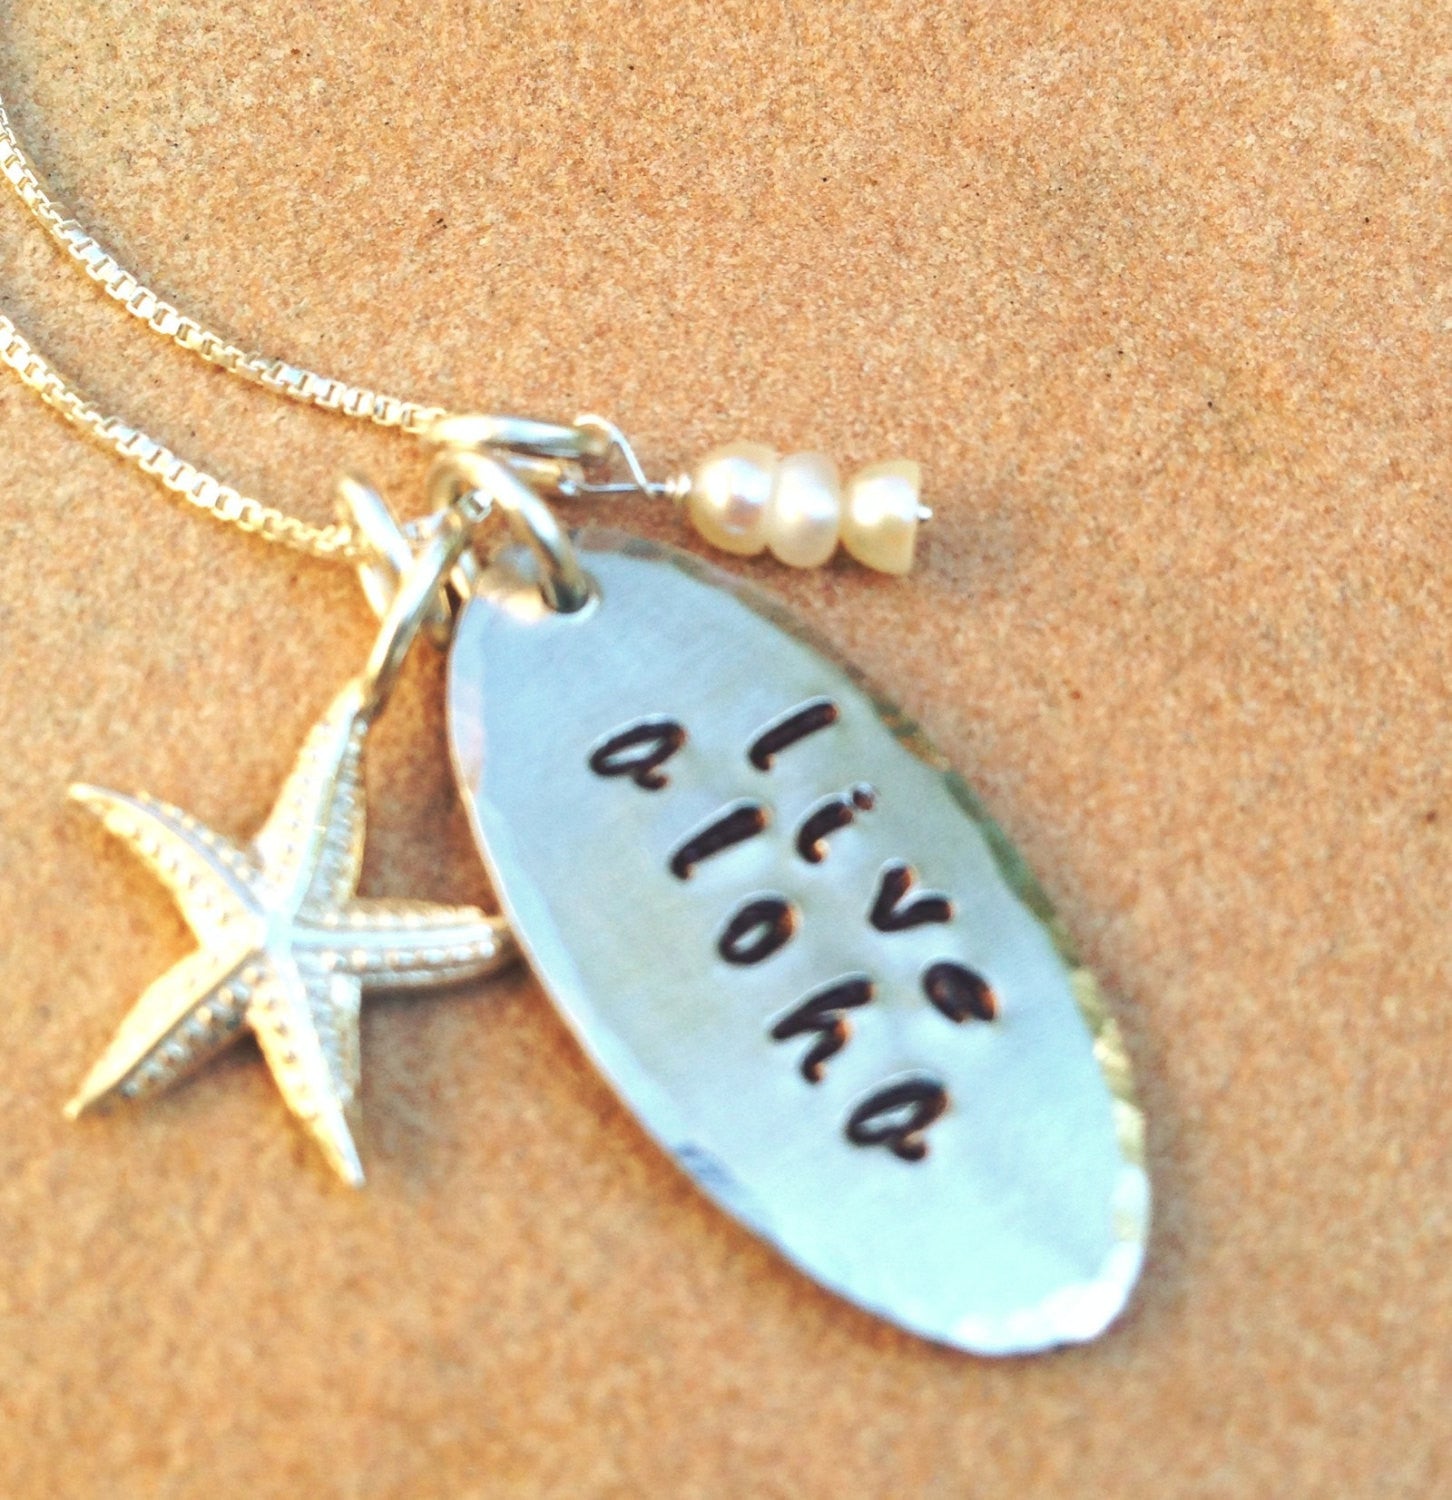 Live Aloha Necklace, Hawaiian Jewelry, Natashaaloha Jewelry, Hawaiian Necklace, Halau Necklace - Natashaaloha, jewelry, bracelets, necklace, keychains, fishing lures, gifts for men, charms, personalized, 